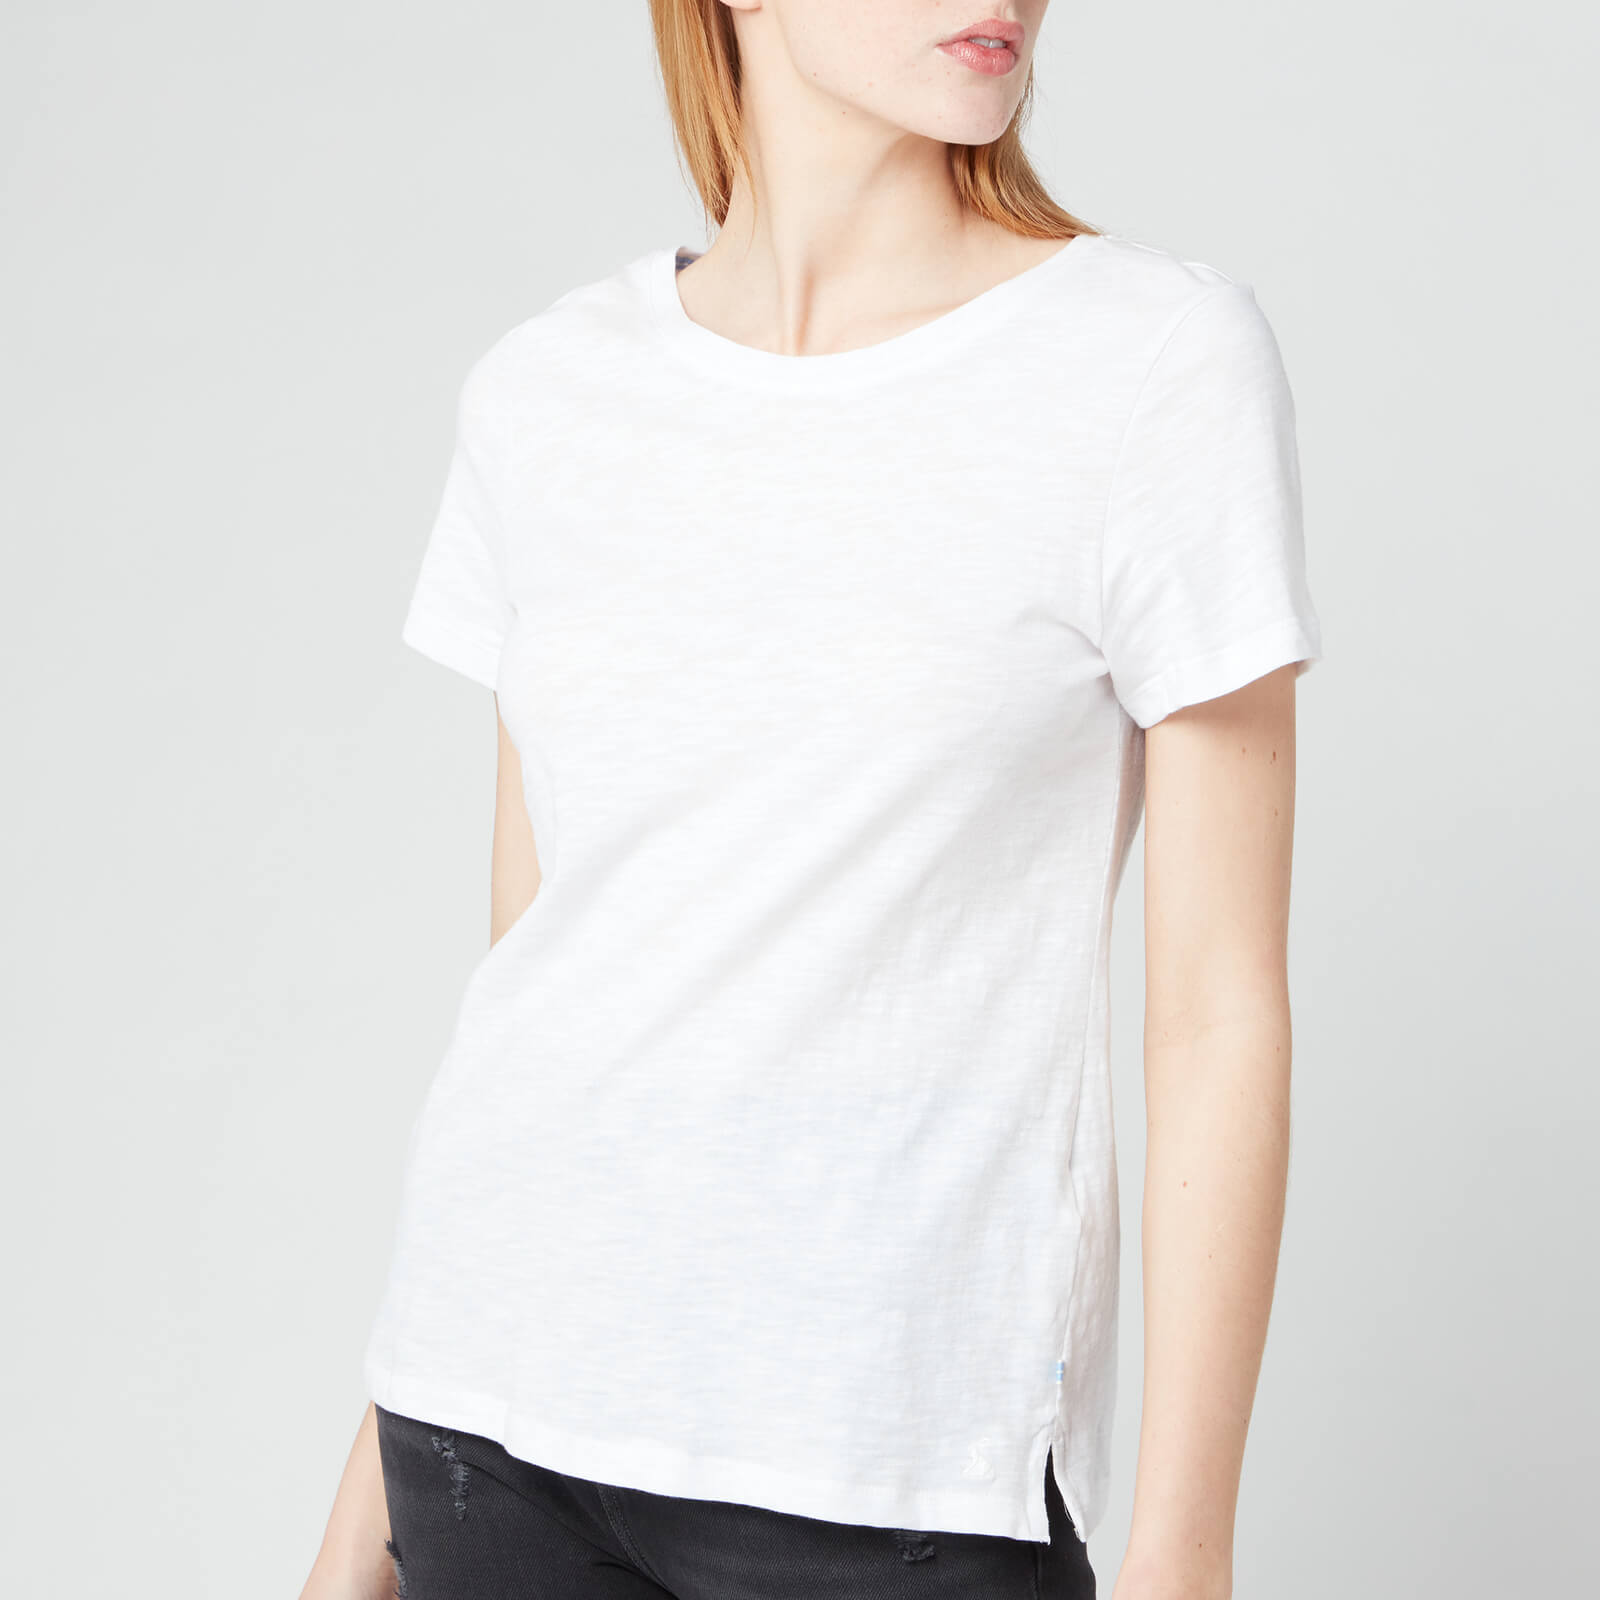 Joules Women's Carley Solid T-Shirt - Bright White - UK 6